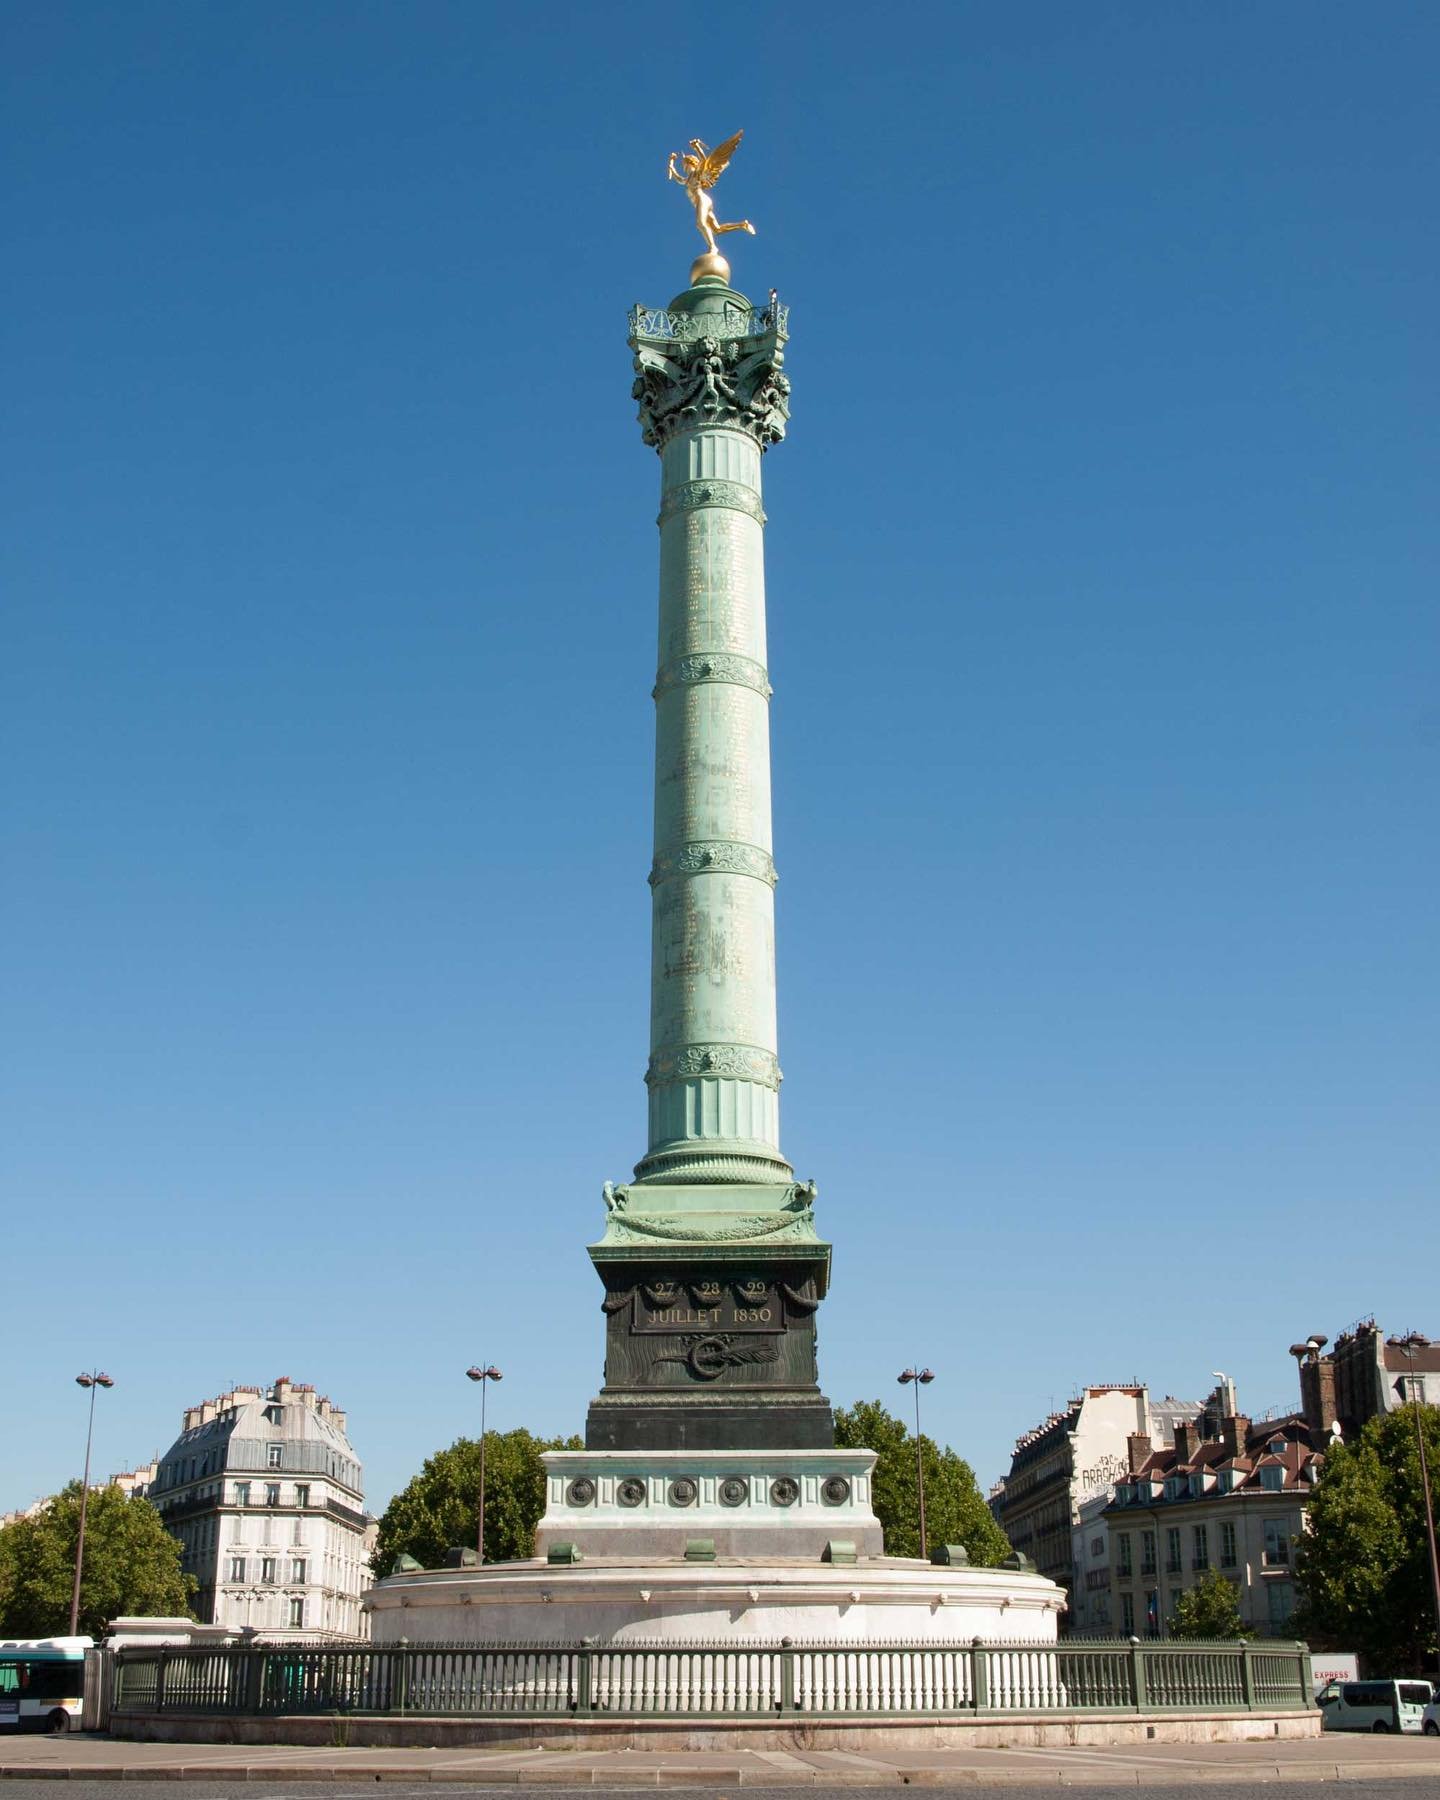 In Paris&rsquo; 11th arrondissement, Colonne de Juillet in Place de la Bastille marks the place where the Bastille Prison stood and it is  engraved with the names of those that died in July 1830 revolution. 
Check out my website French Views for lots